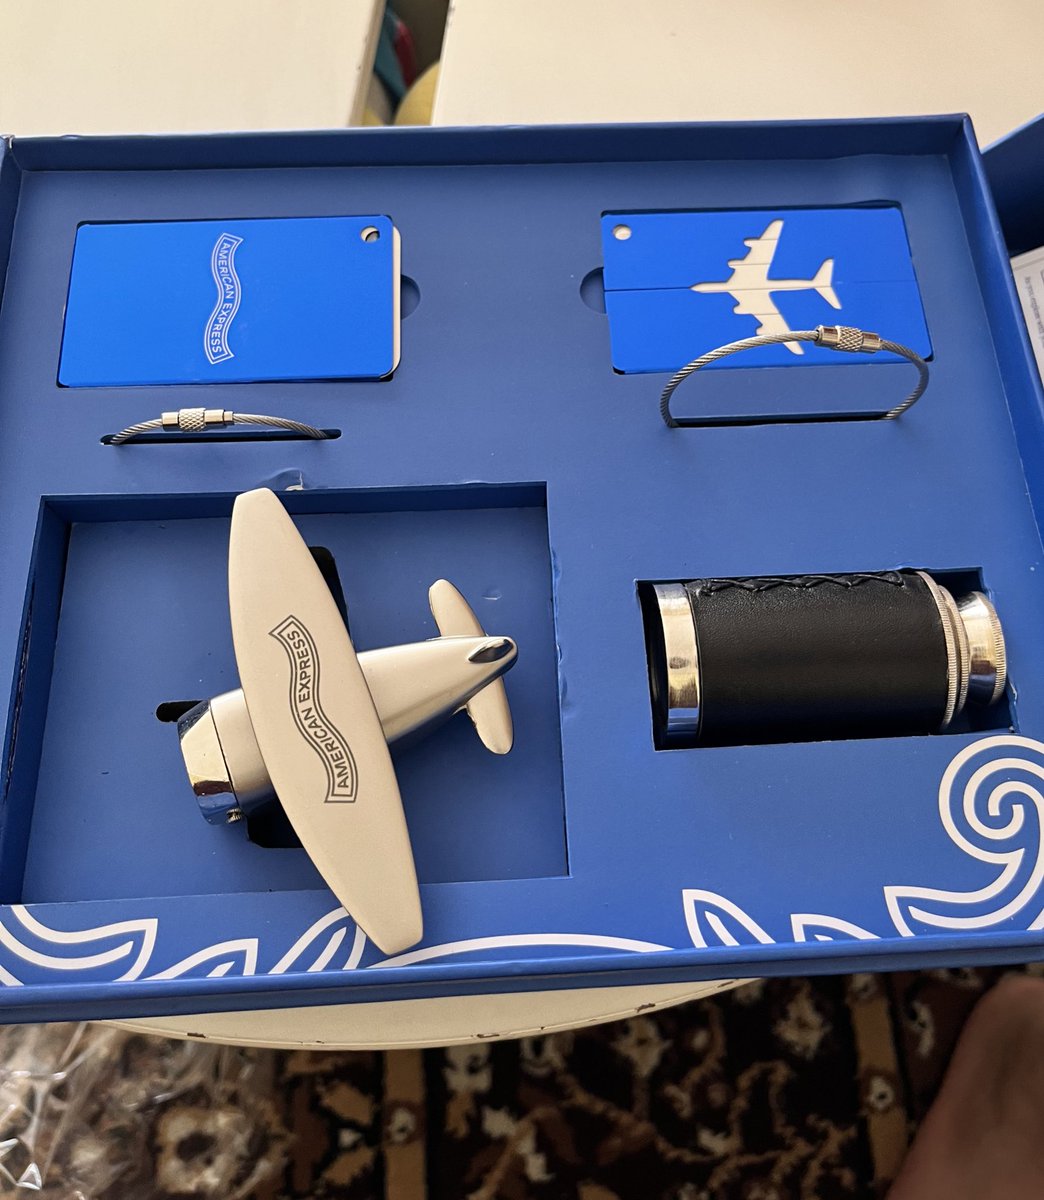 Absolutely loved the limited edition explorers kit by @AmexIndia 
Great stuff #amex #ccgeek @cards_wizard @imYadav31 @wittysiddharth @drgrudge @CardMavenIn